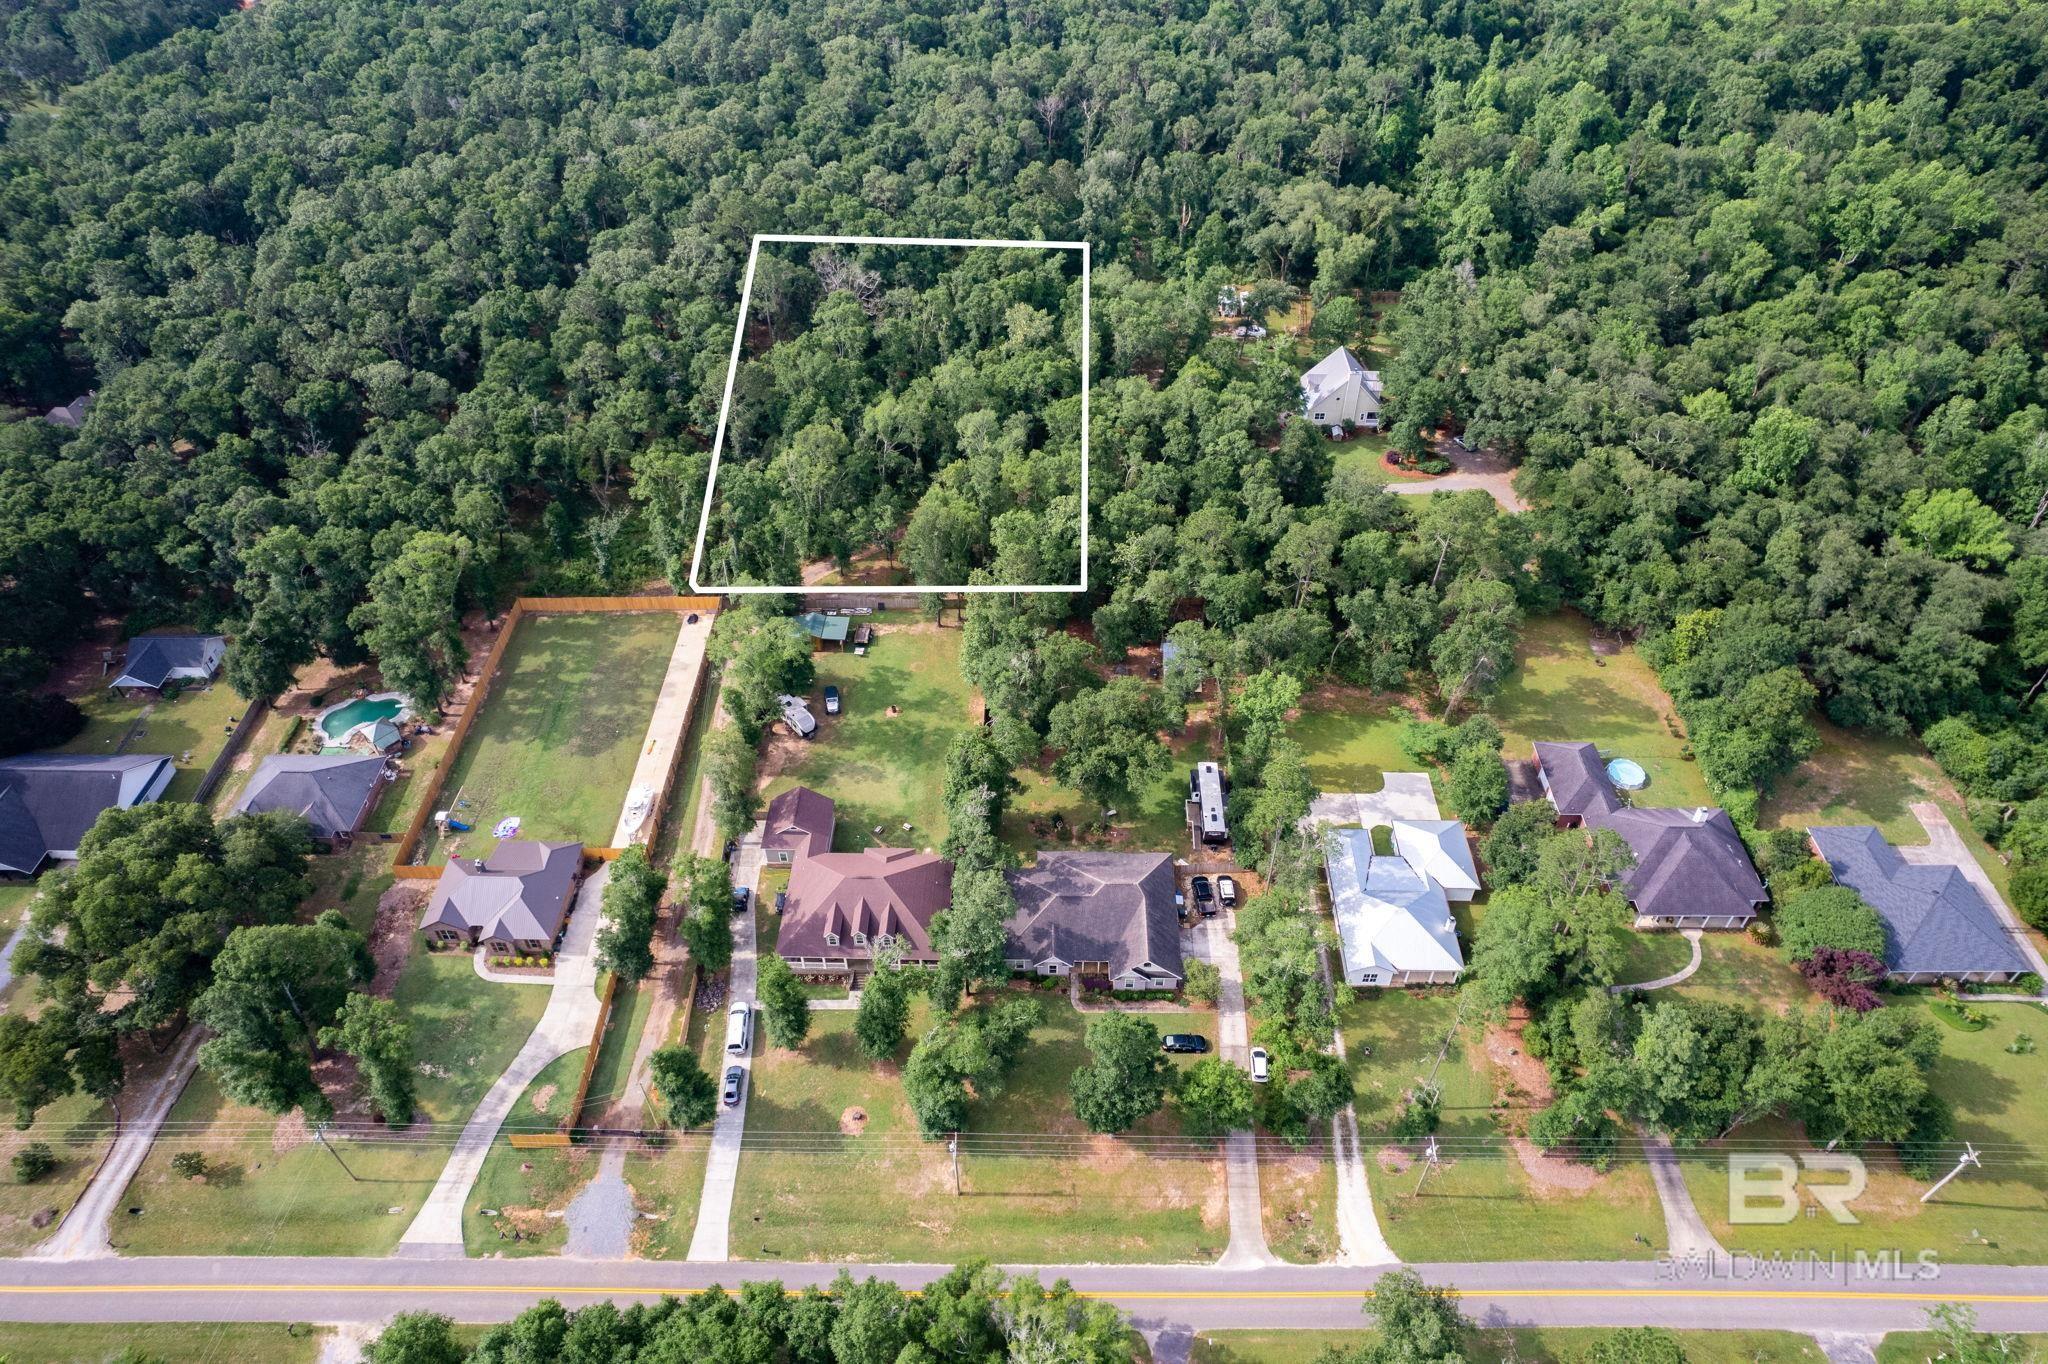 Build your dream home on this 1.68 acres in Fairhope's Hideaway subdivision. There are 3 lots total in this quaint subdivision. 1800 sq ft minimum house. Deeded easement on North side of Lot 3 to access Lots 1 & 2. City water available. Water line has been installed. Septic system will be required to build a house. There is a fire hydrant in front of gate. There is also a security gate with 2 keypads as you enter Cary Lane. Buyer to verify all information during due diligence. All information is deemed reliable and accurate.